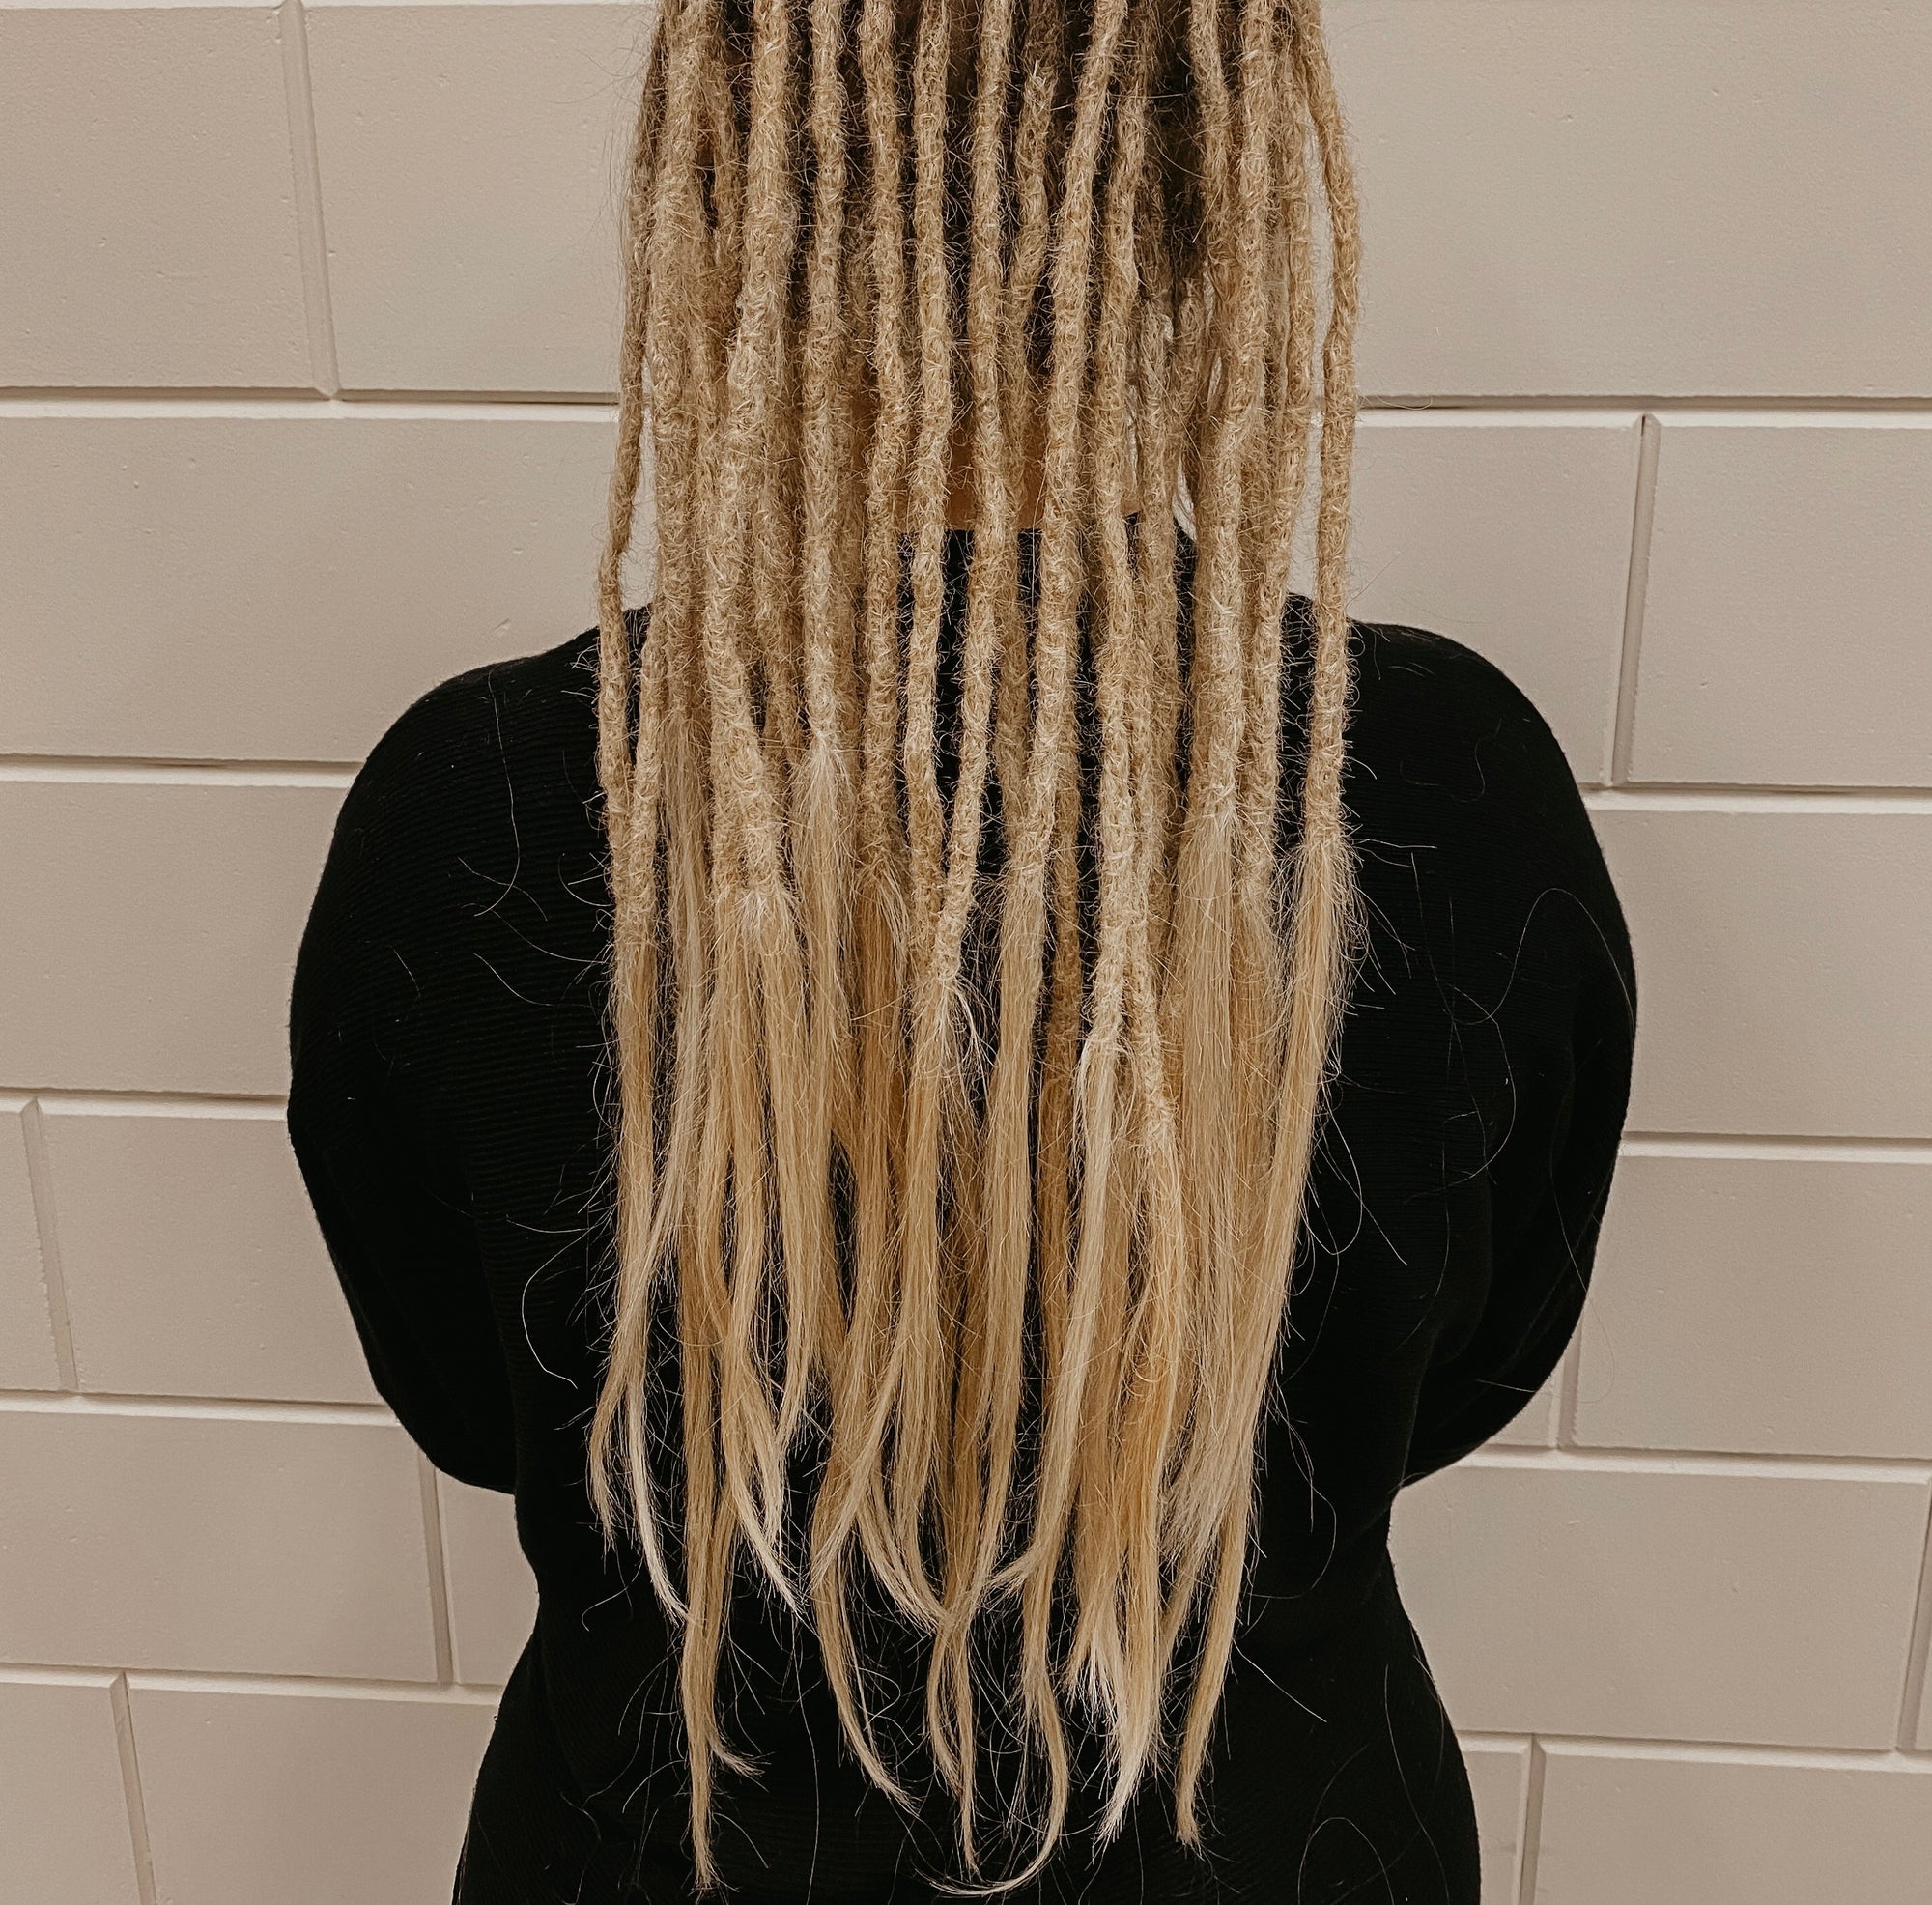 Find the perfect Dreadlocks and accessories at the